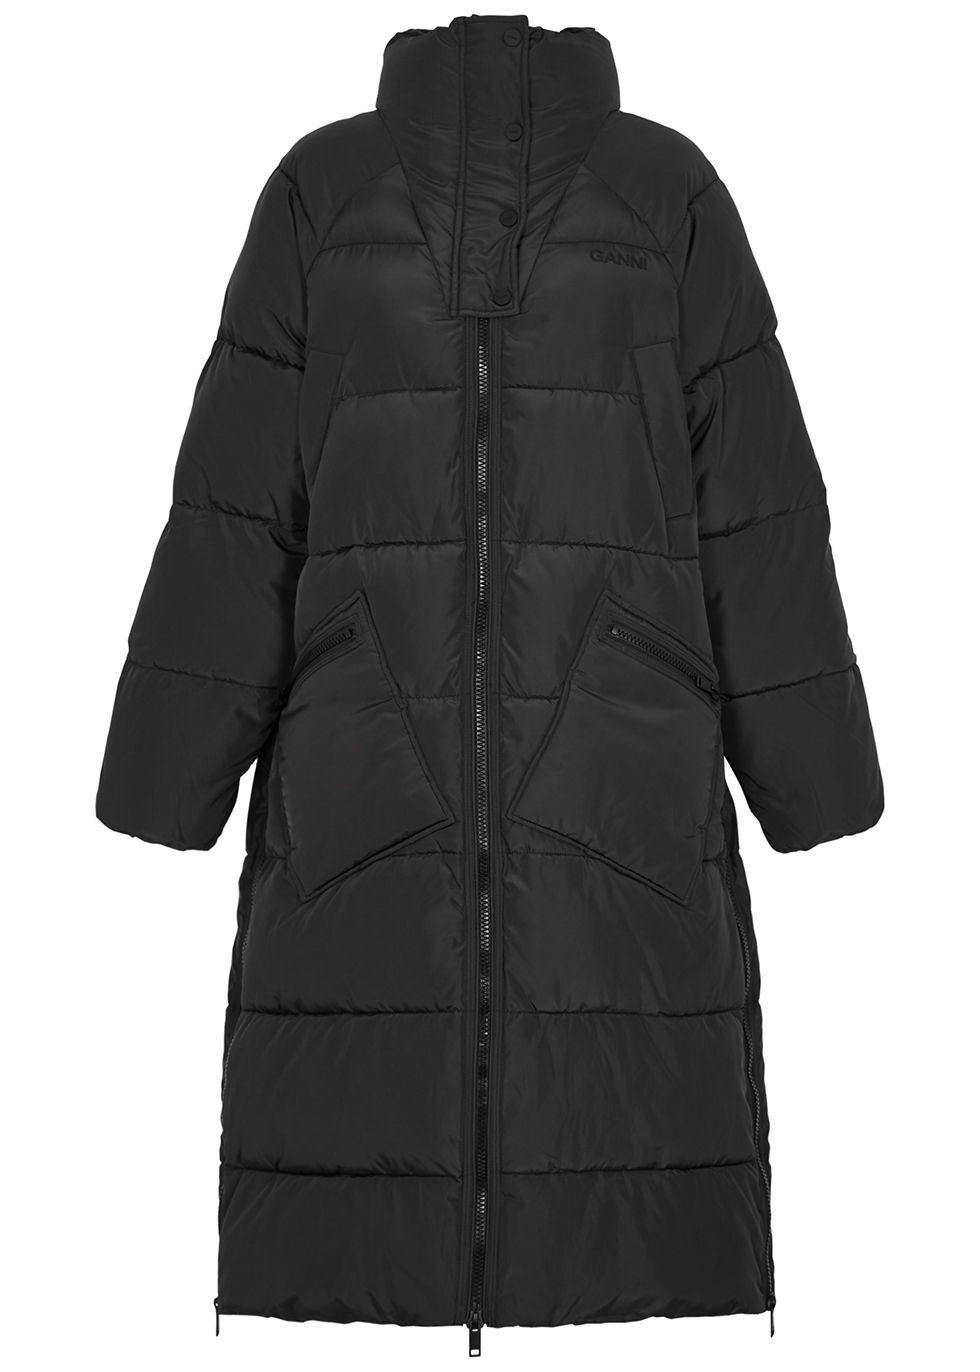 Harvey Nichols Clothing Coats Parkas KIDS Black quilted shell parka 2-4 years 